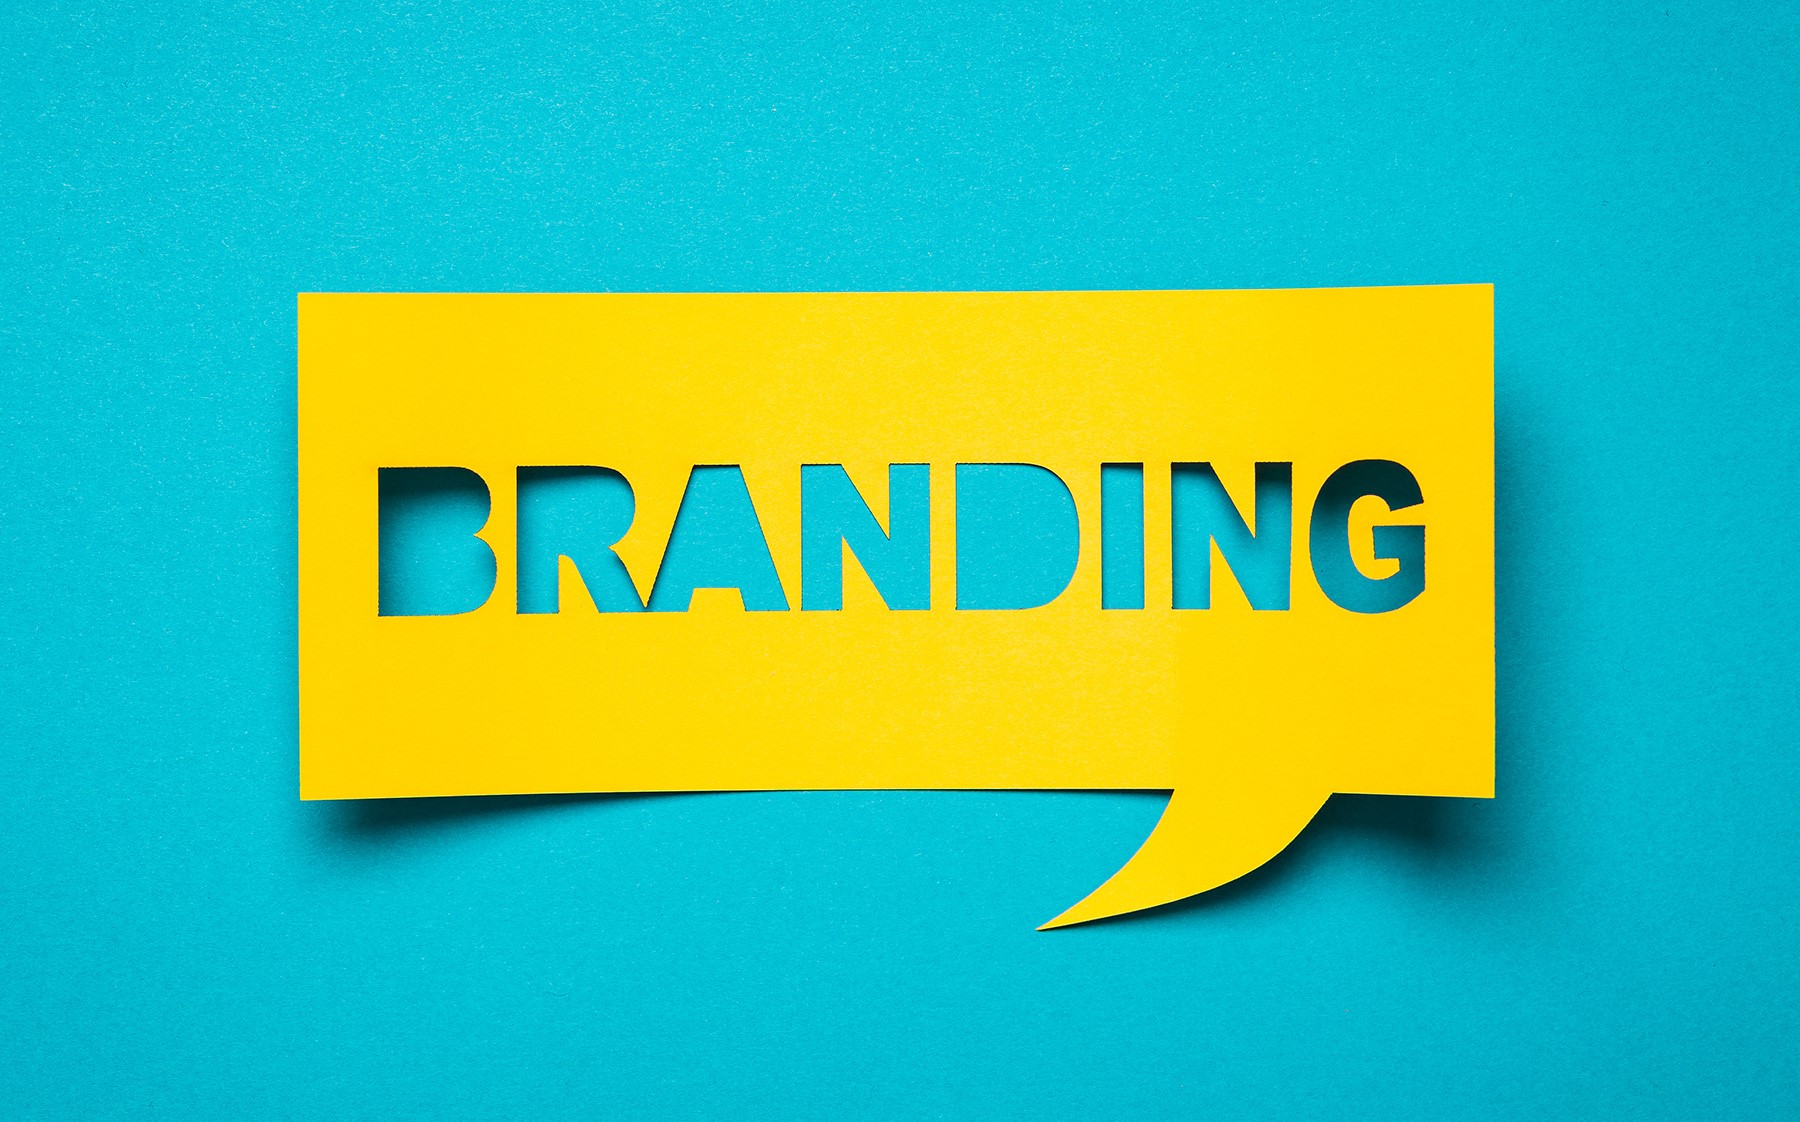 40 Questions for a Smart Branding Strategy